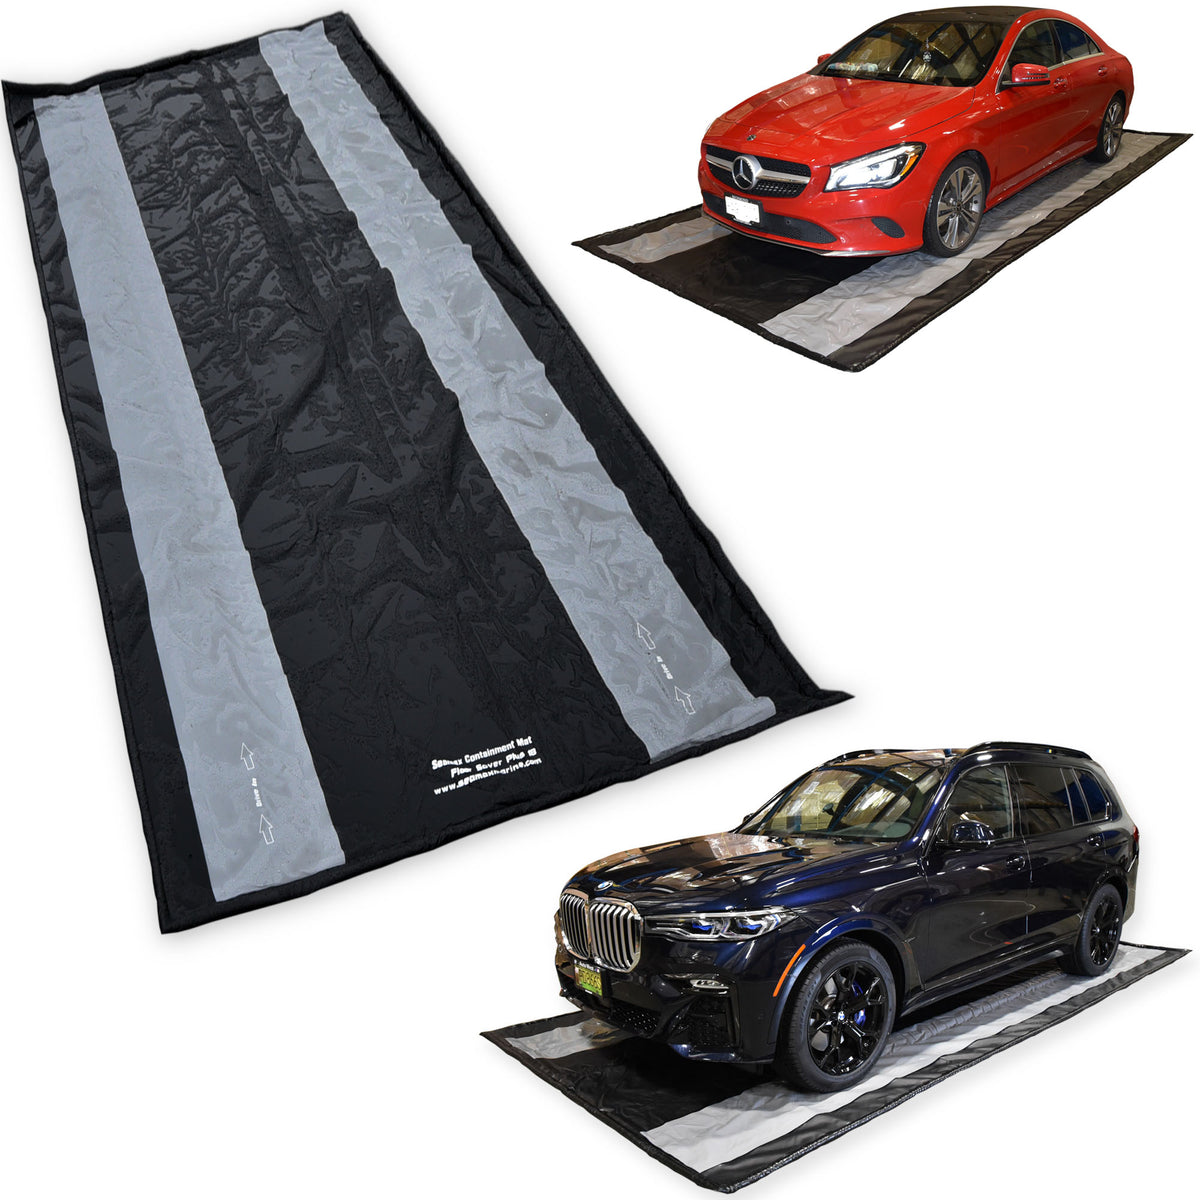 Blue Garage Floor Car Mat with Stay-Put Corners, Fixation & Anti